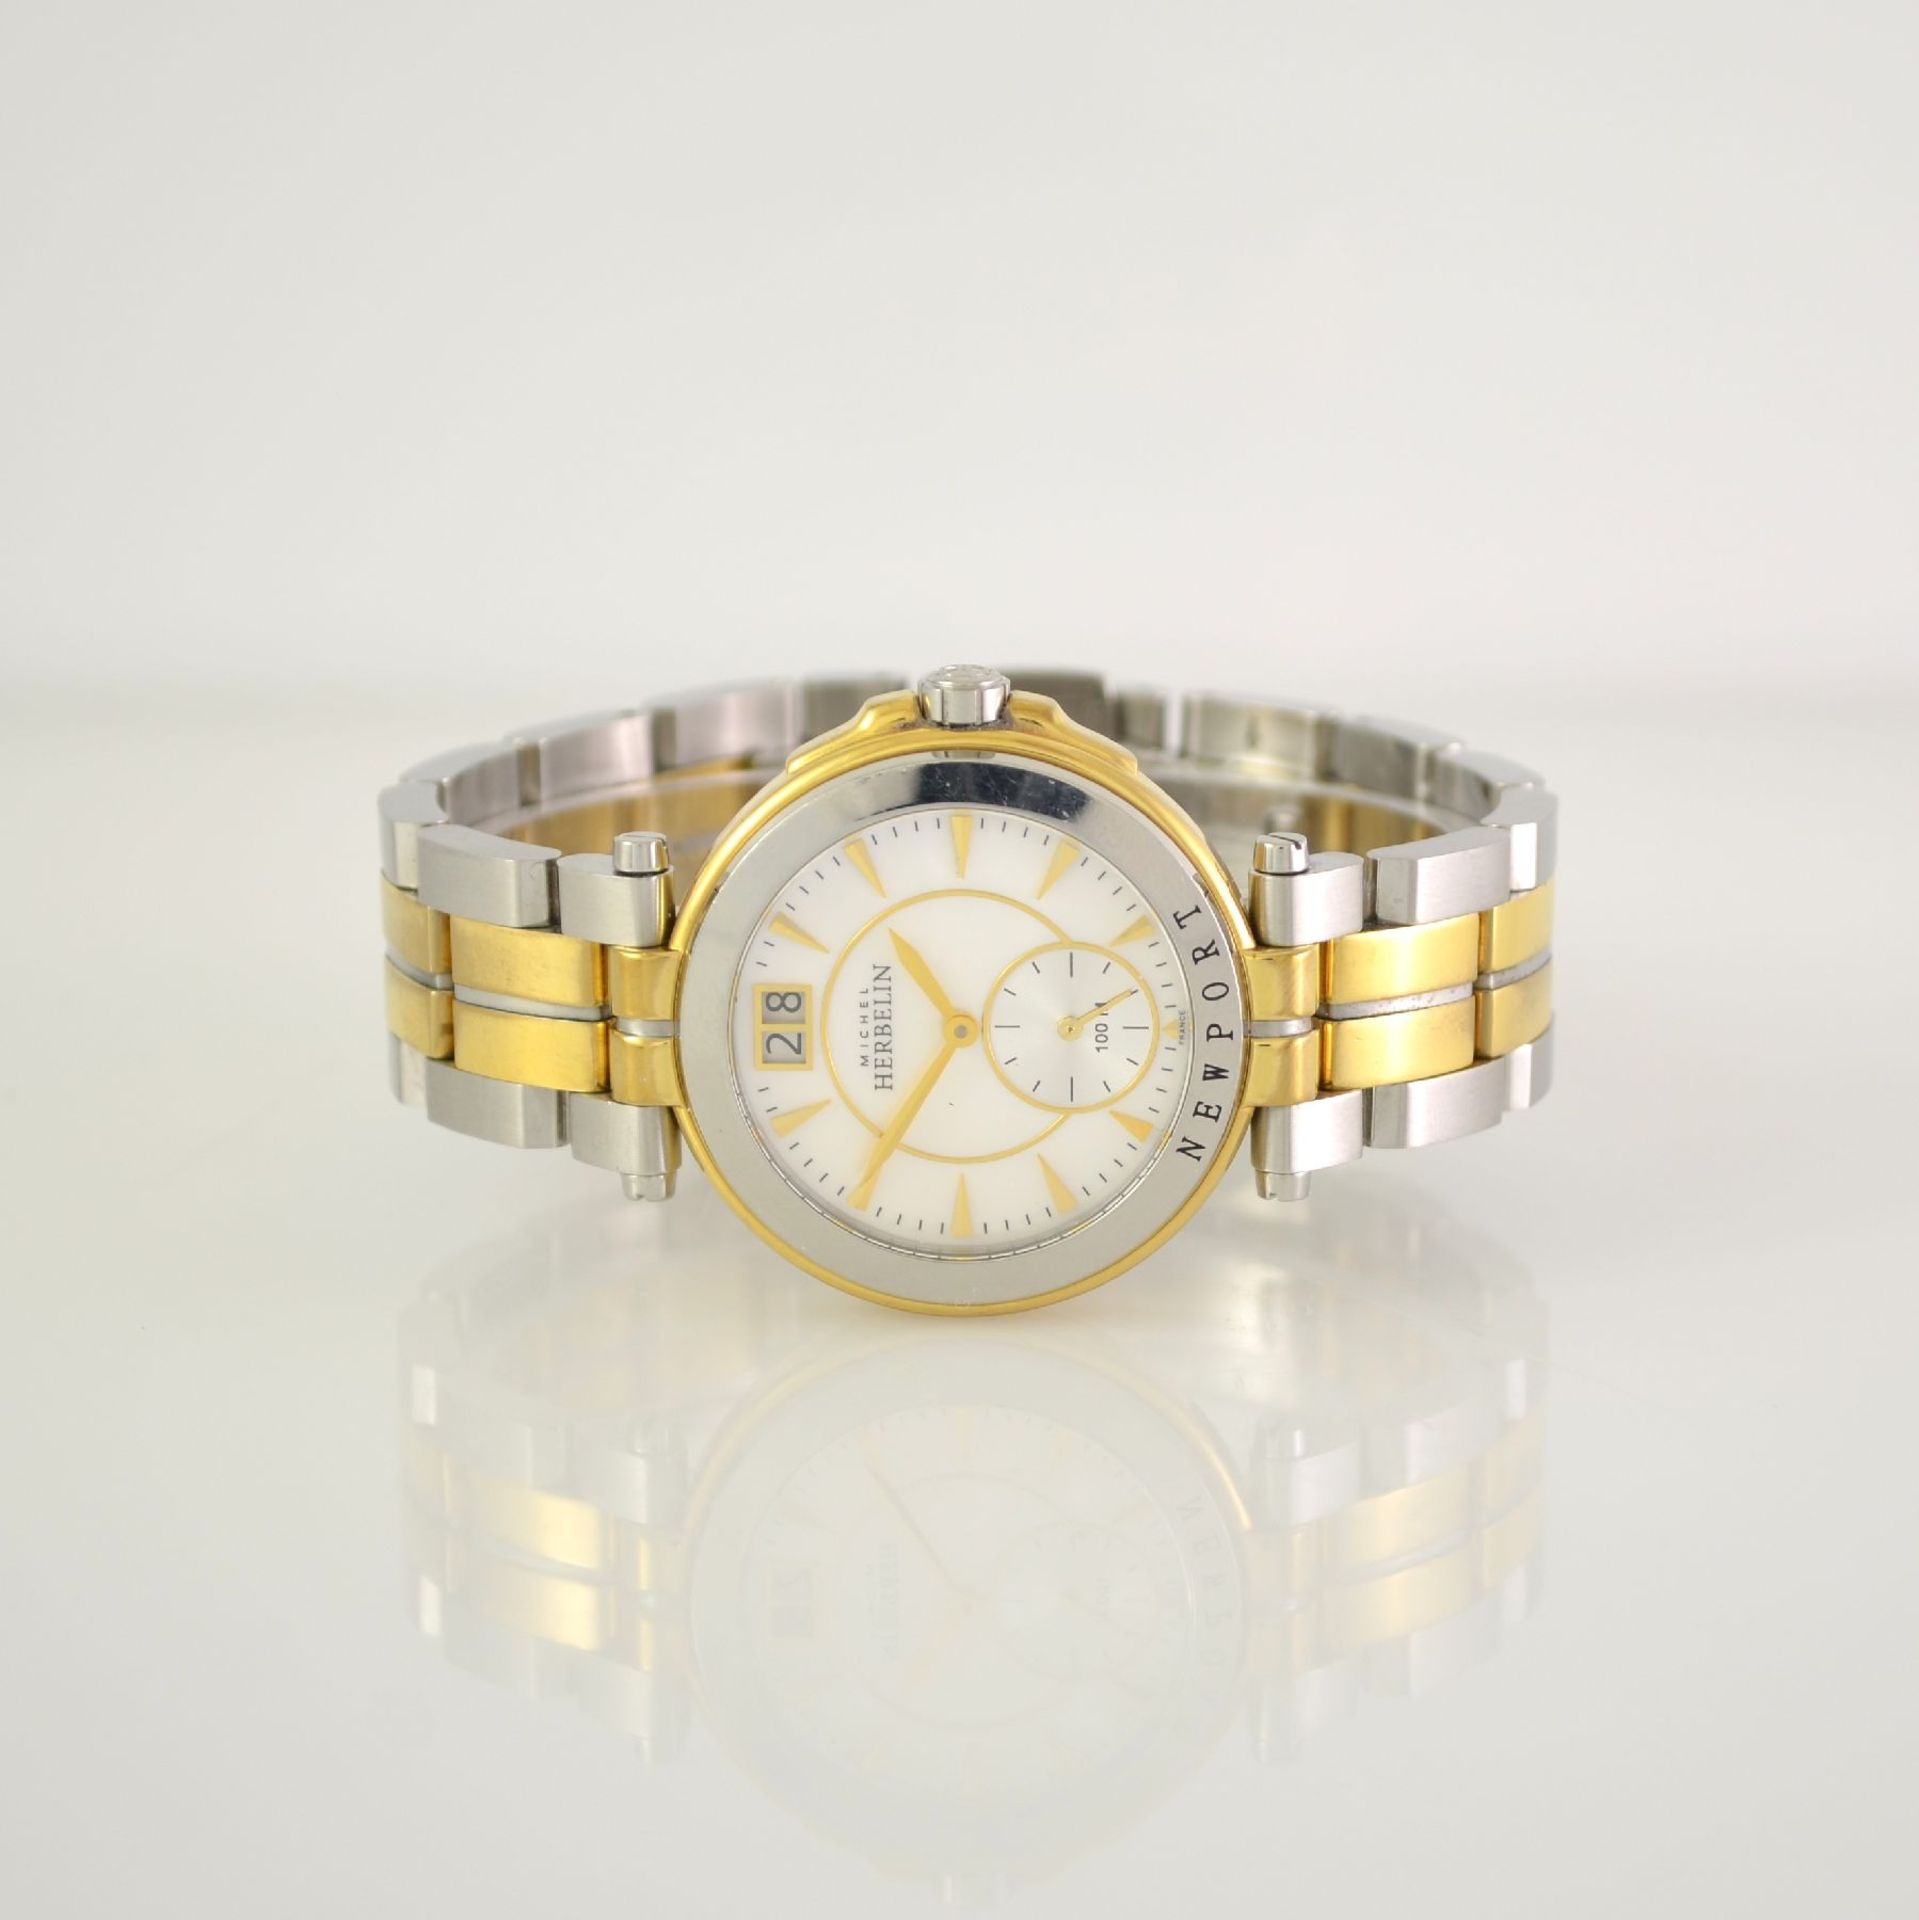 MICHEL HERBELIN ladies wristwatch Newport Yacht Club, France around 2015, reference 18266, stainless